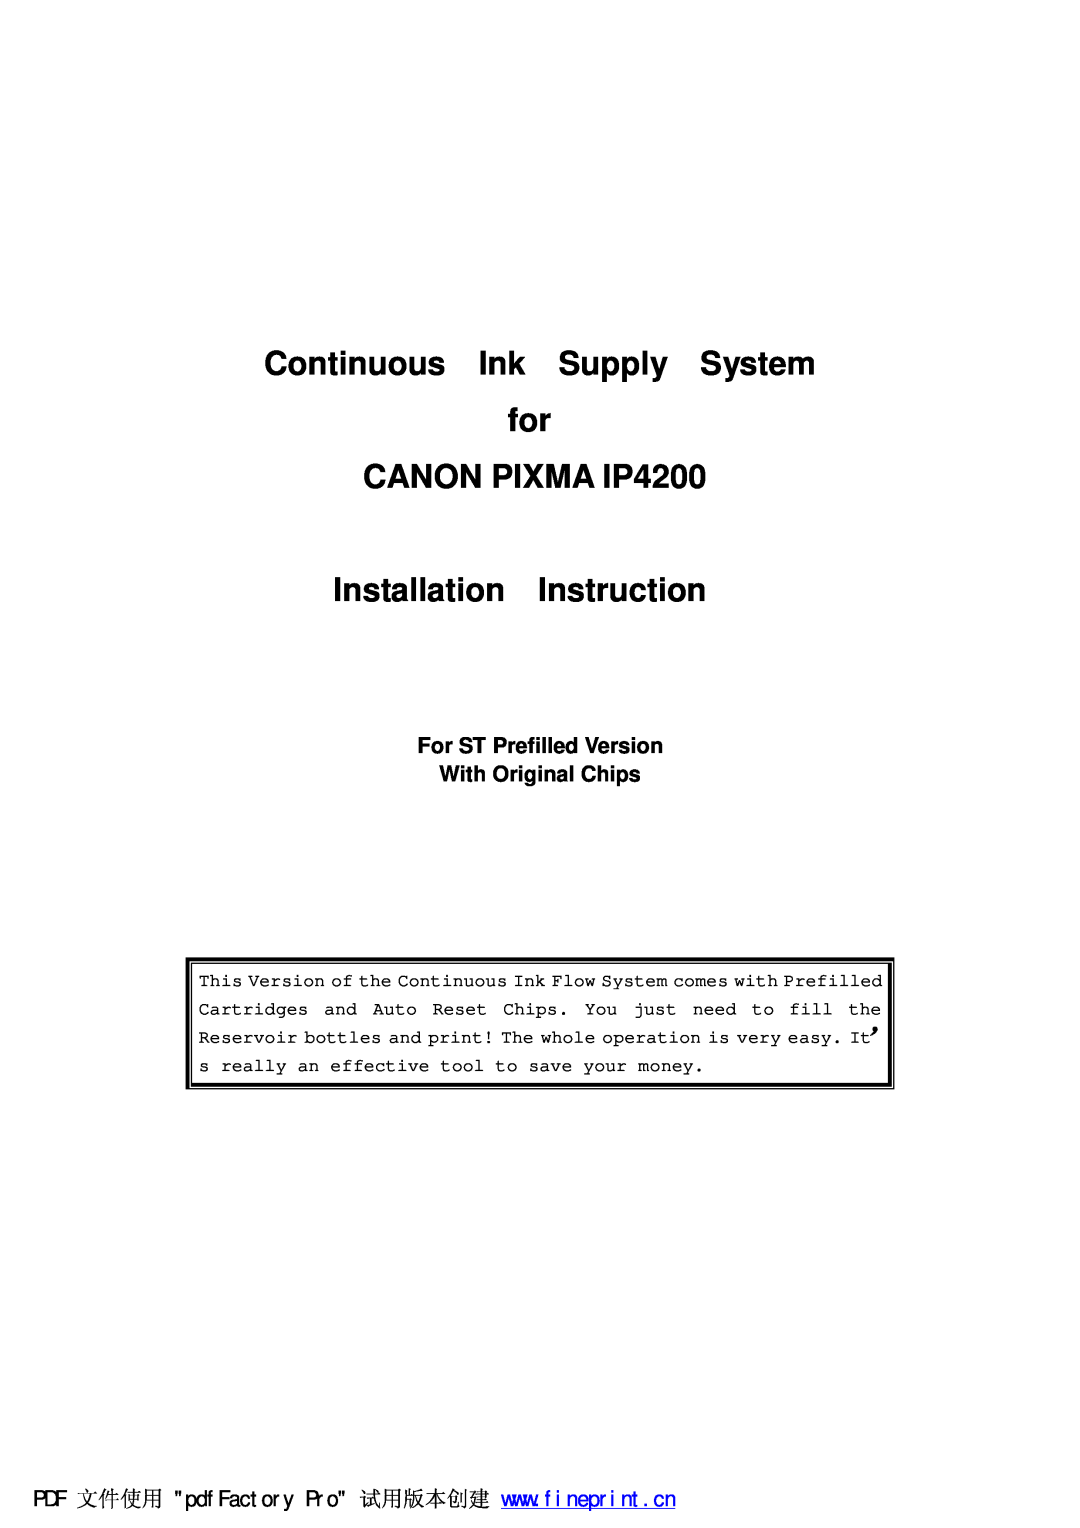 Canon manual For ST Prefilled Version With Original Chips, Continuous Ink Supply System for CANON PIXMA IP4200 